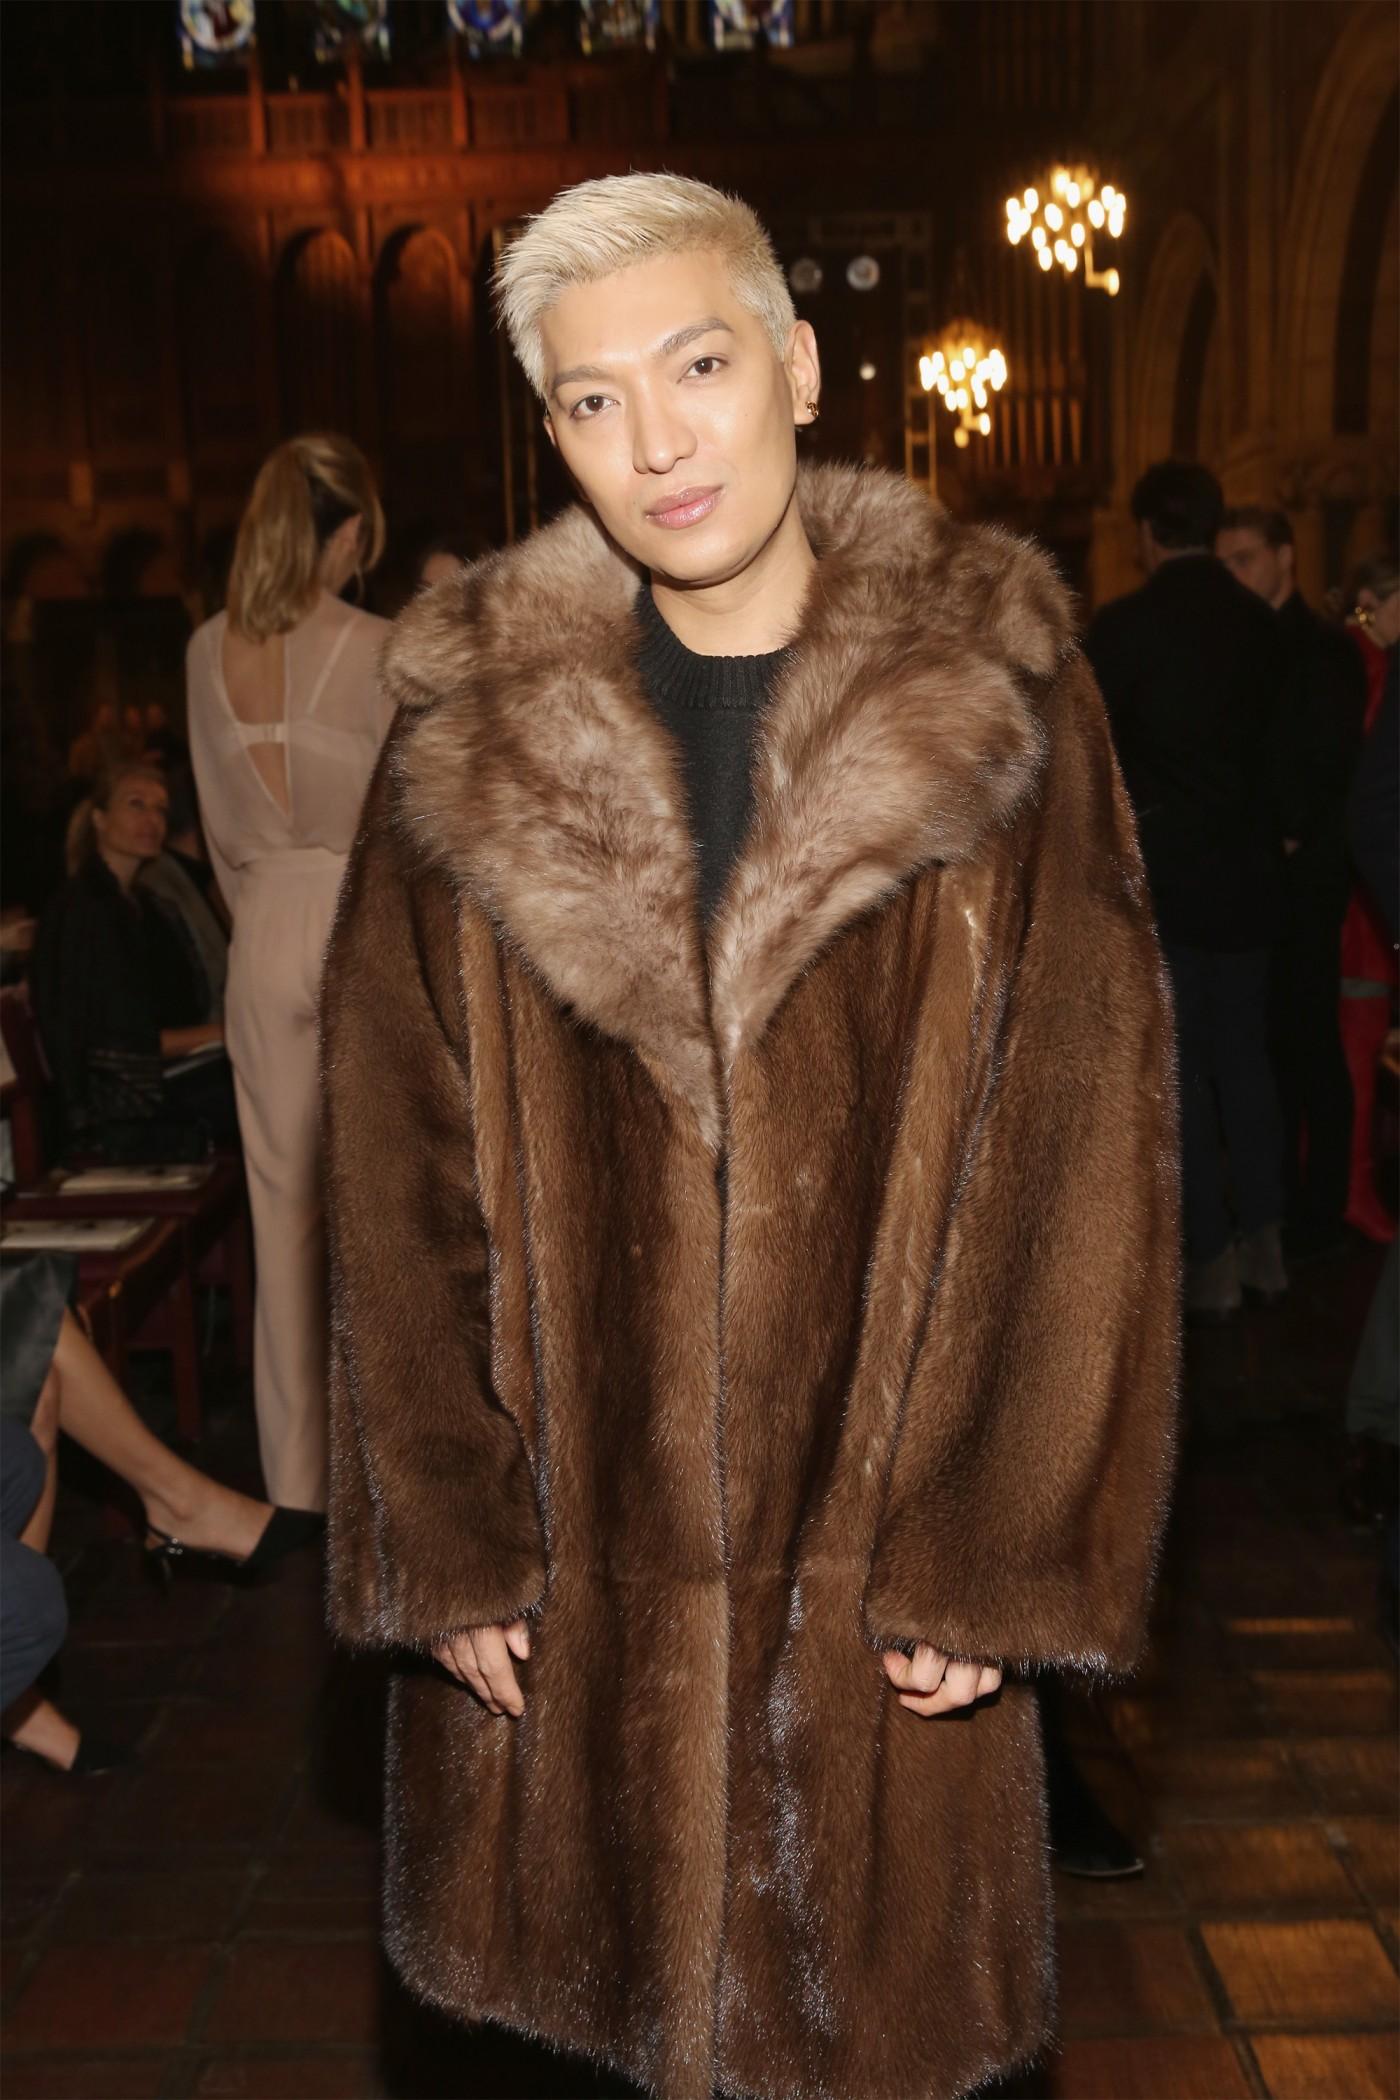 bryanboy on X: Welcome to Swedish living. My husband had a glass